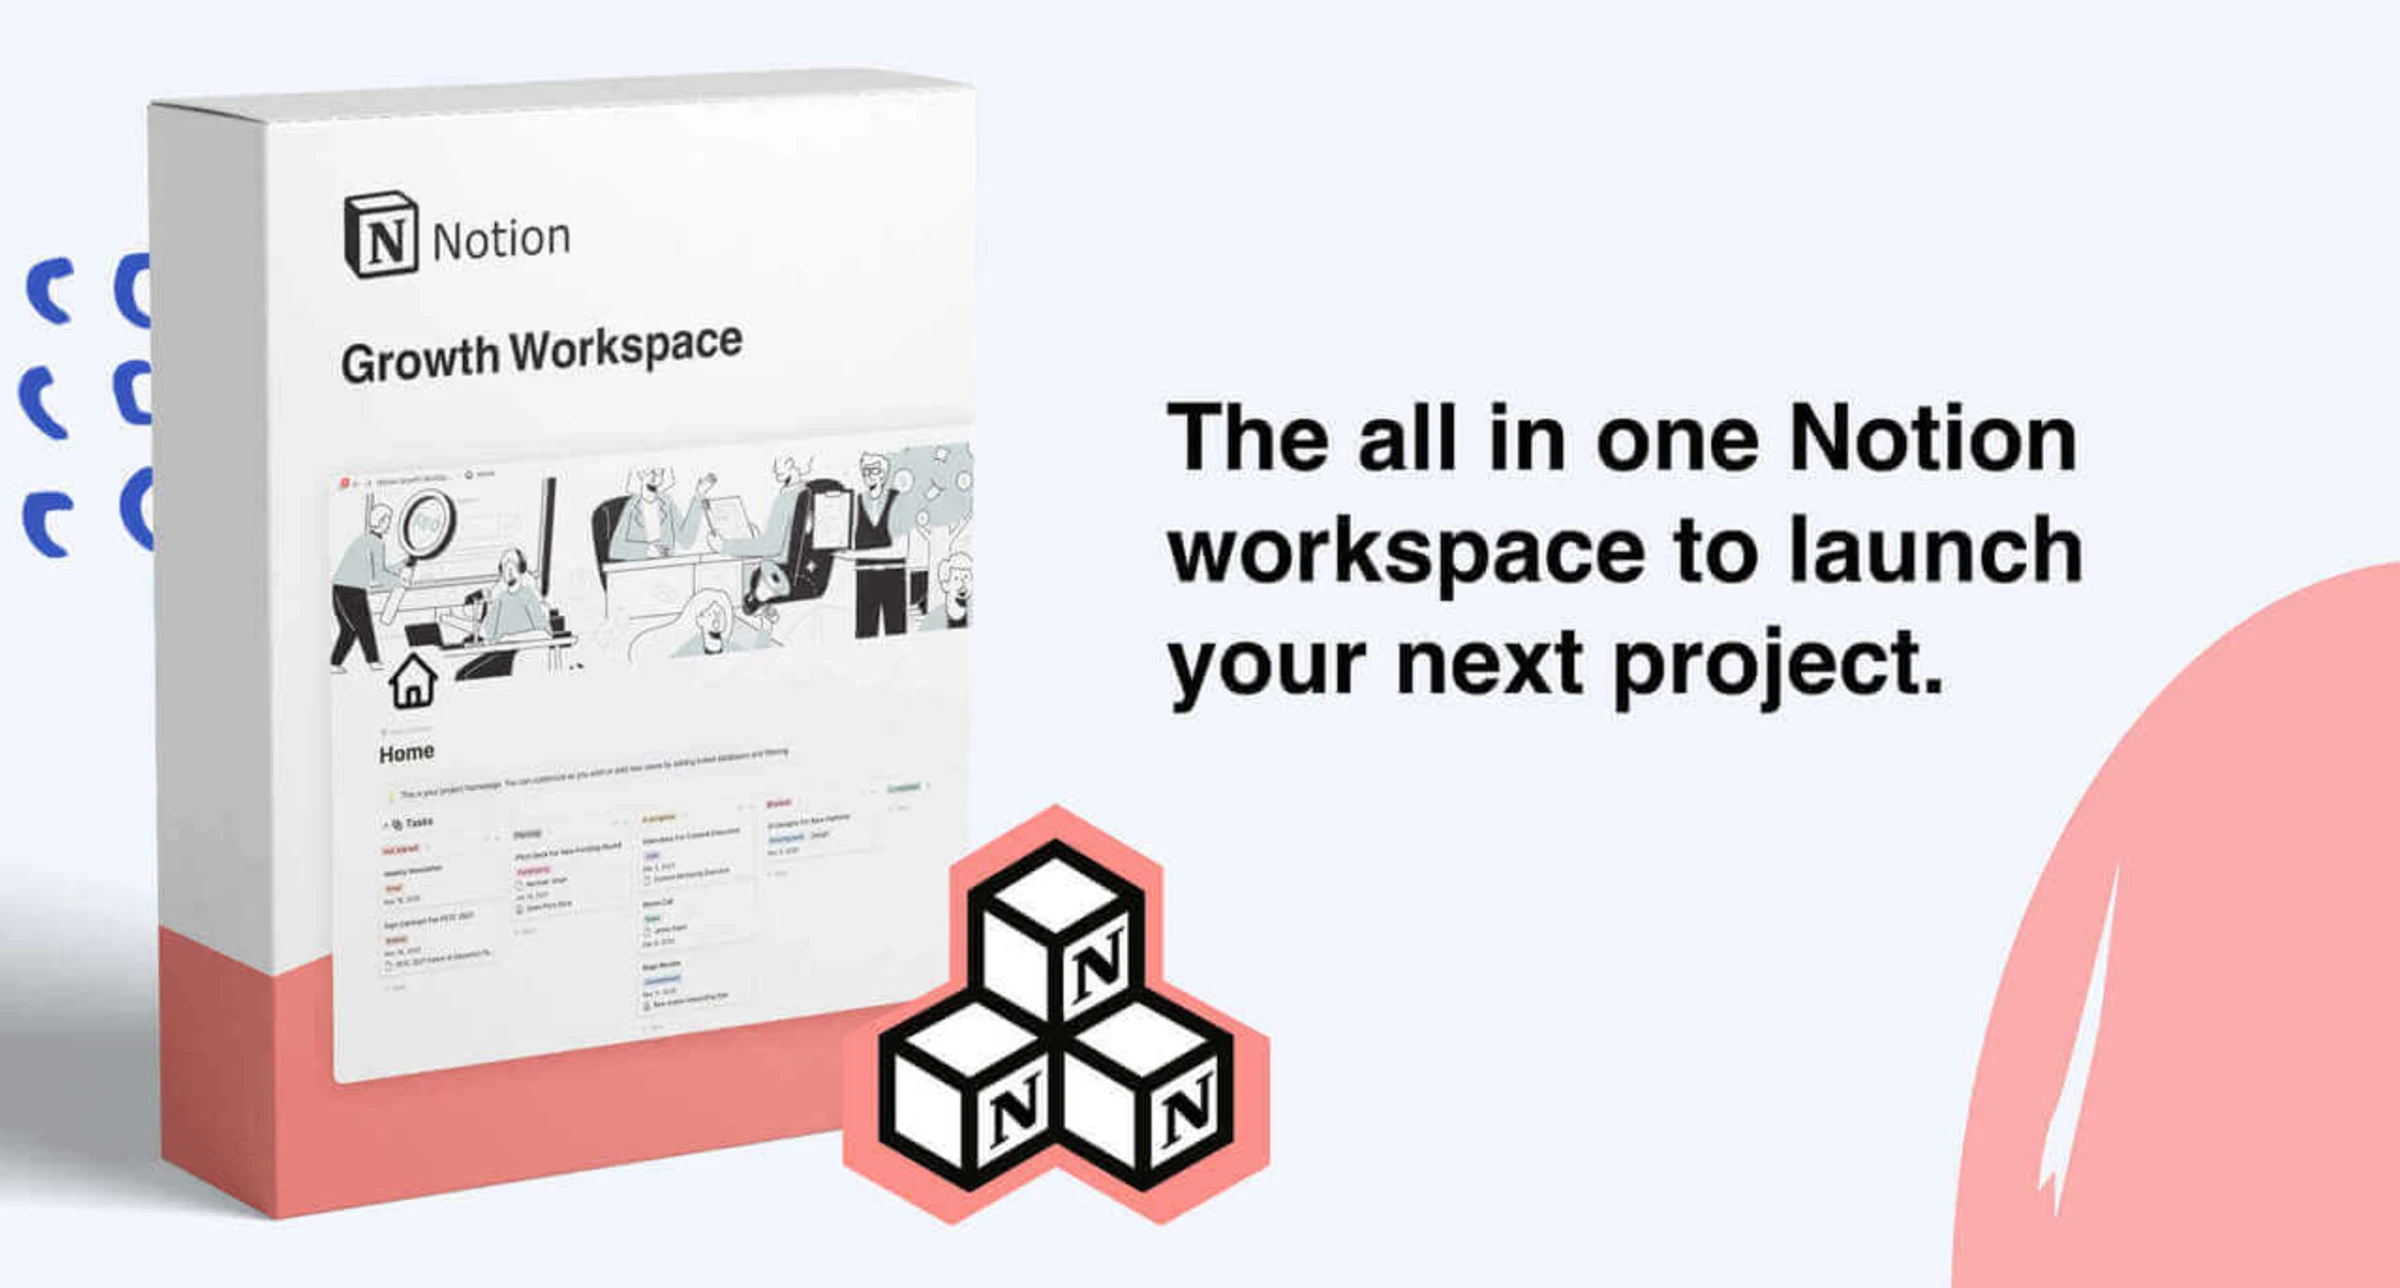 Say hello to the Notion Growth Workspace. The leading frameworks and techniques in project management